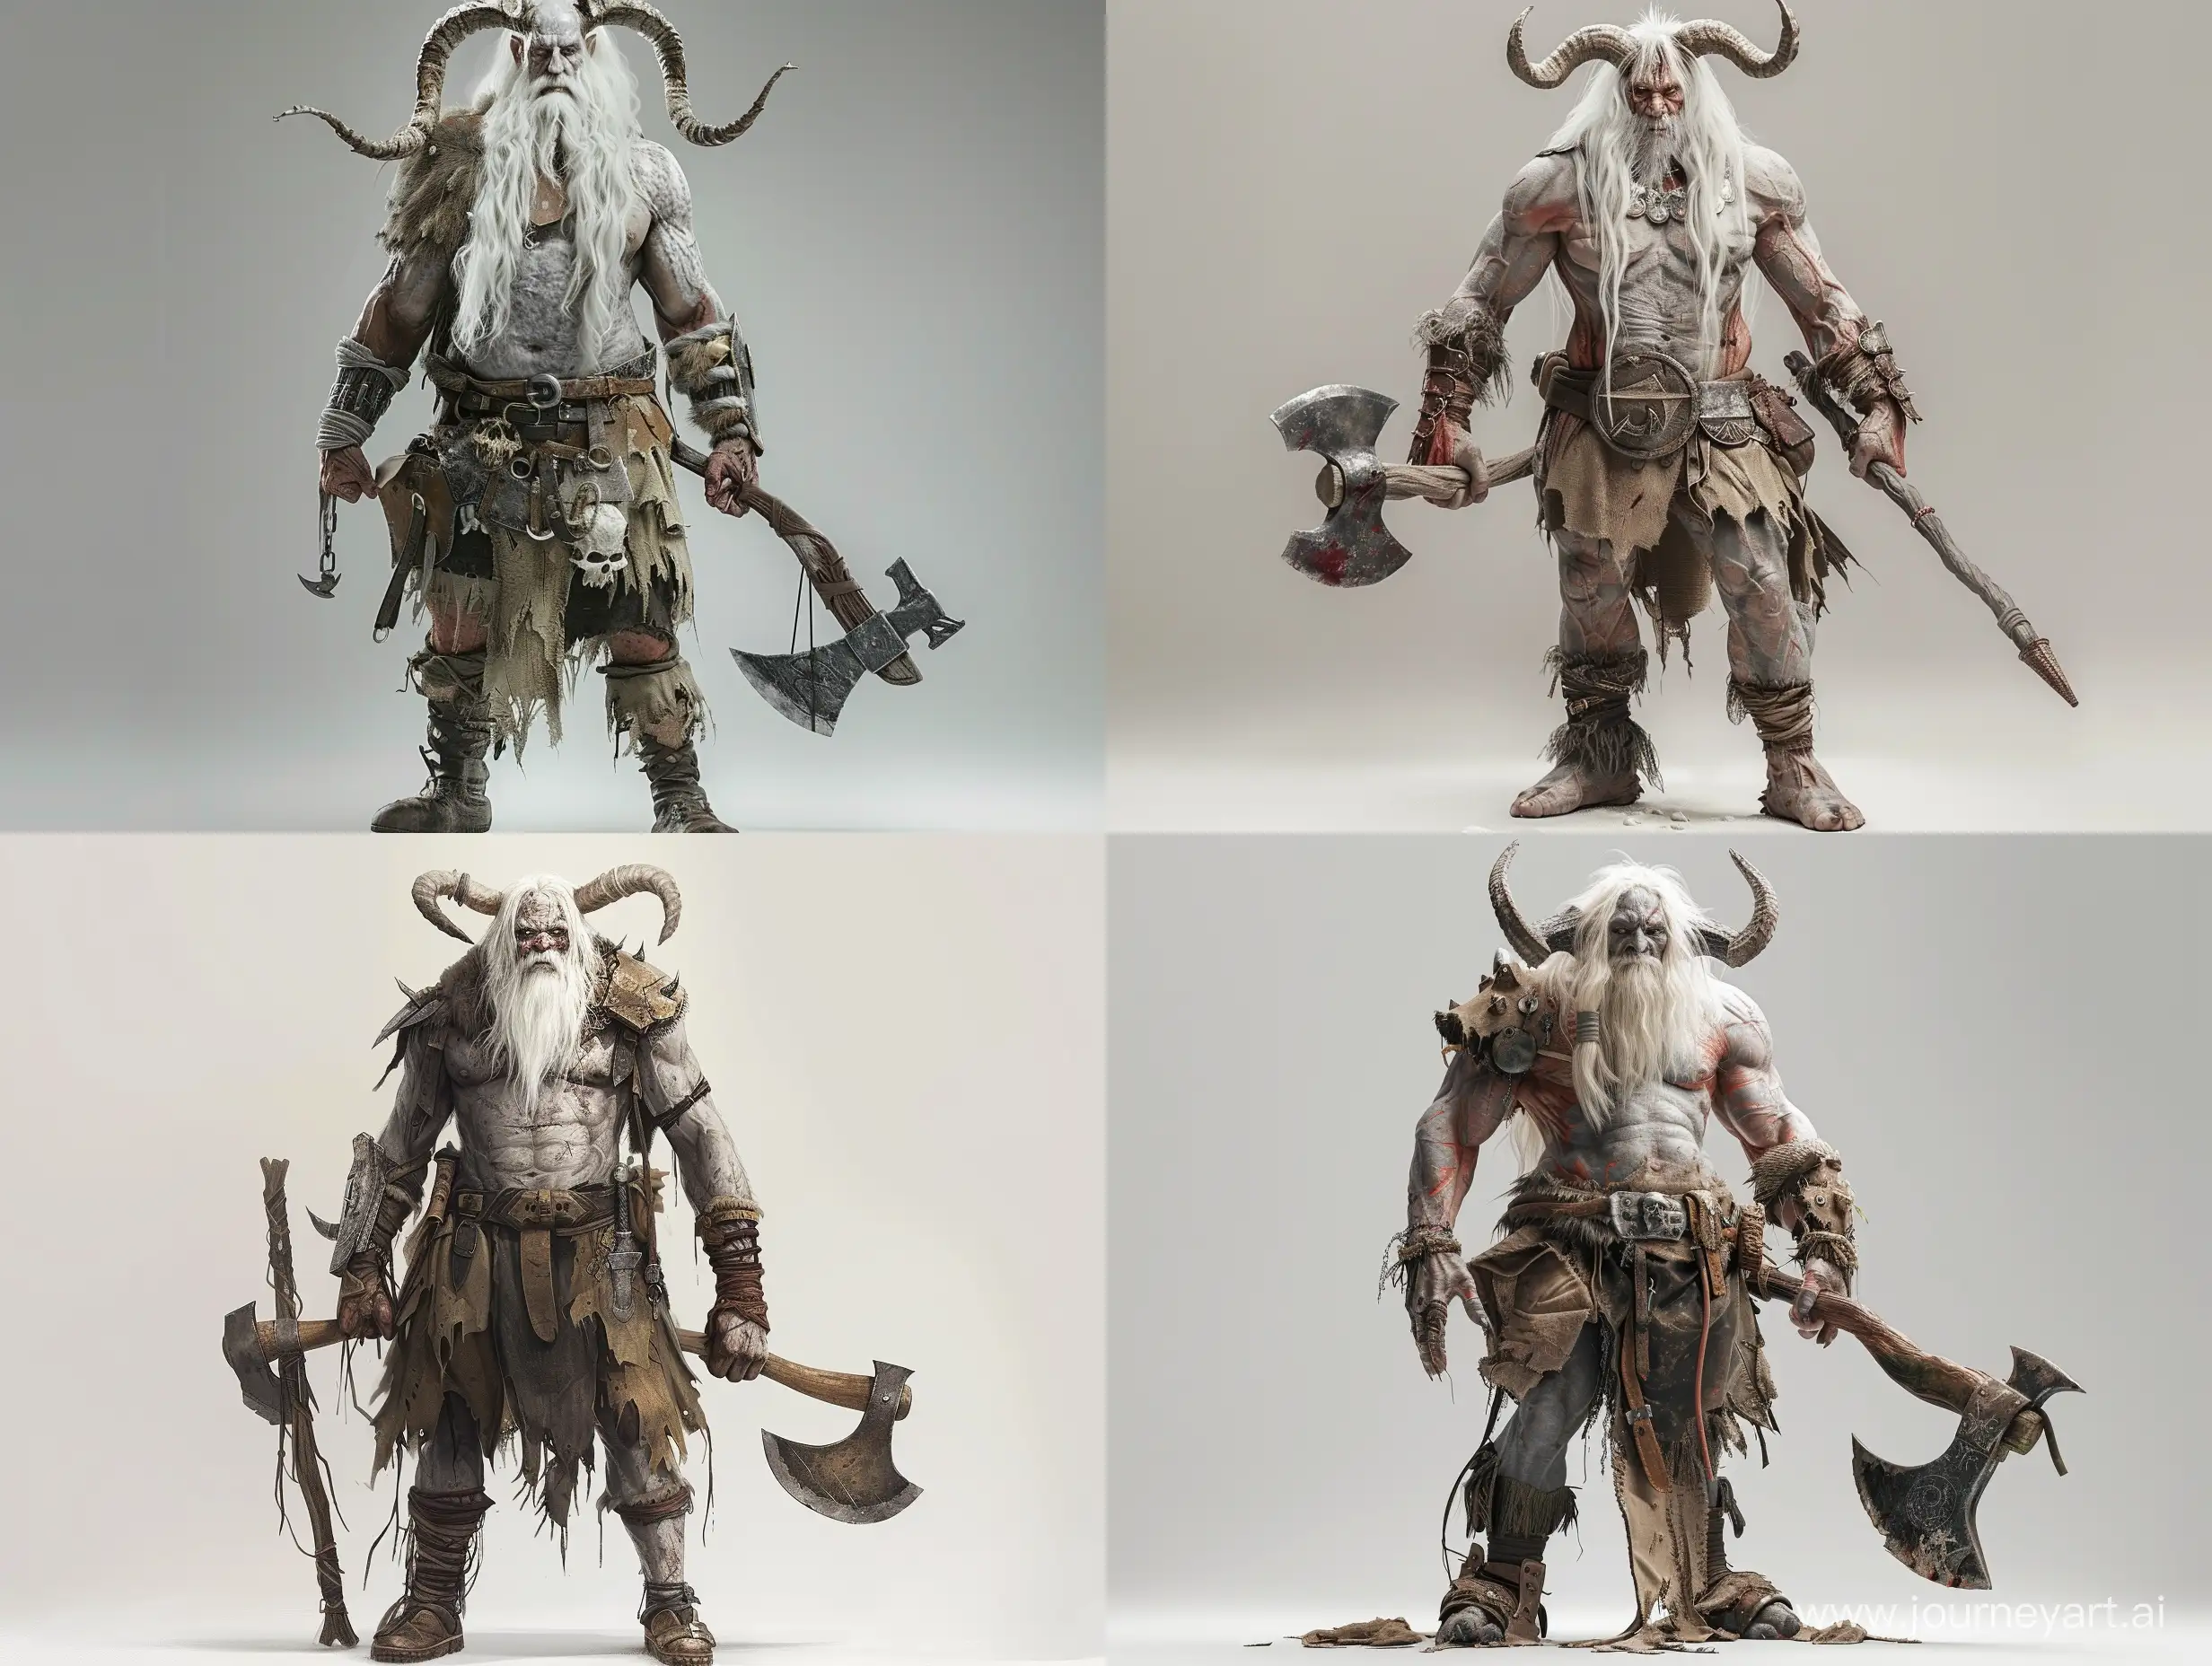 Muscular-Grey-Demon-Warrior-with-Large-Axe-in-Ragged-Armor